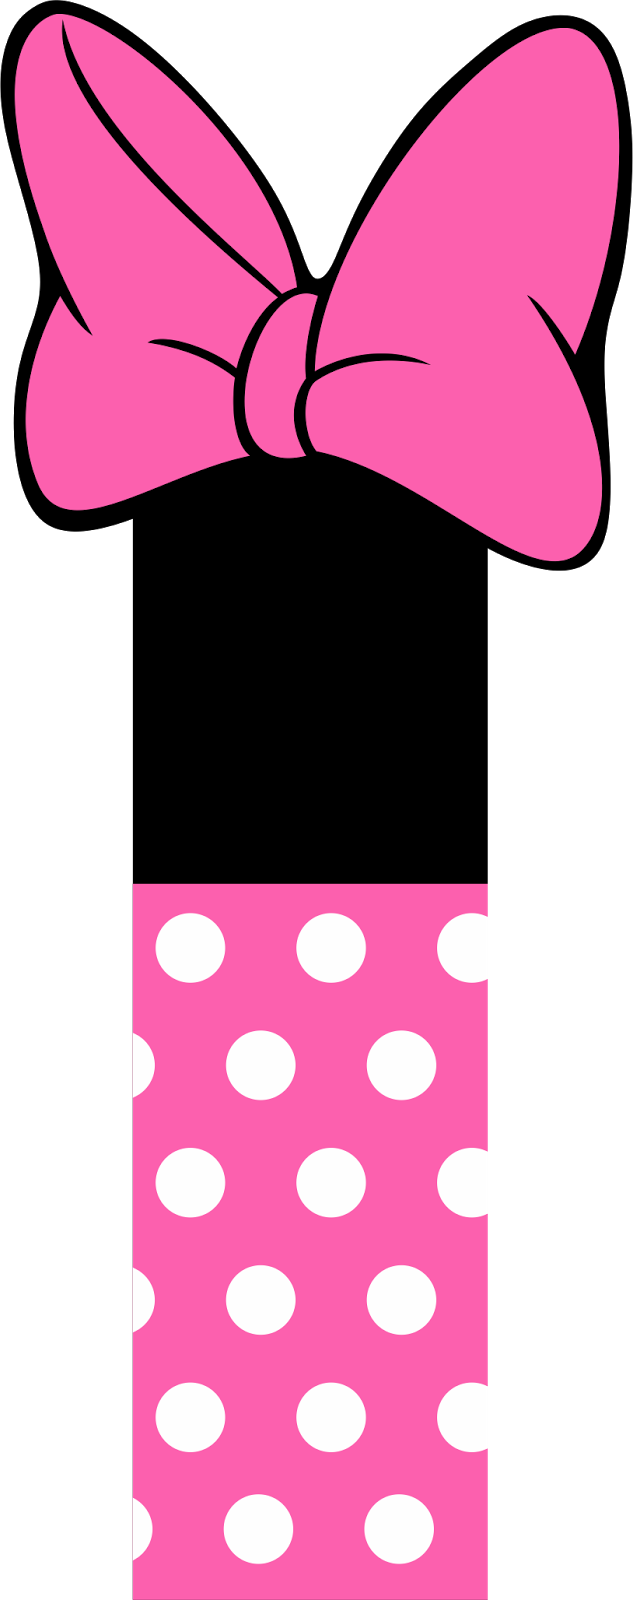 A Pink And White Polka Dot Square With A Bow